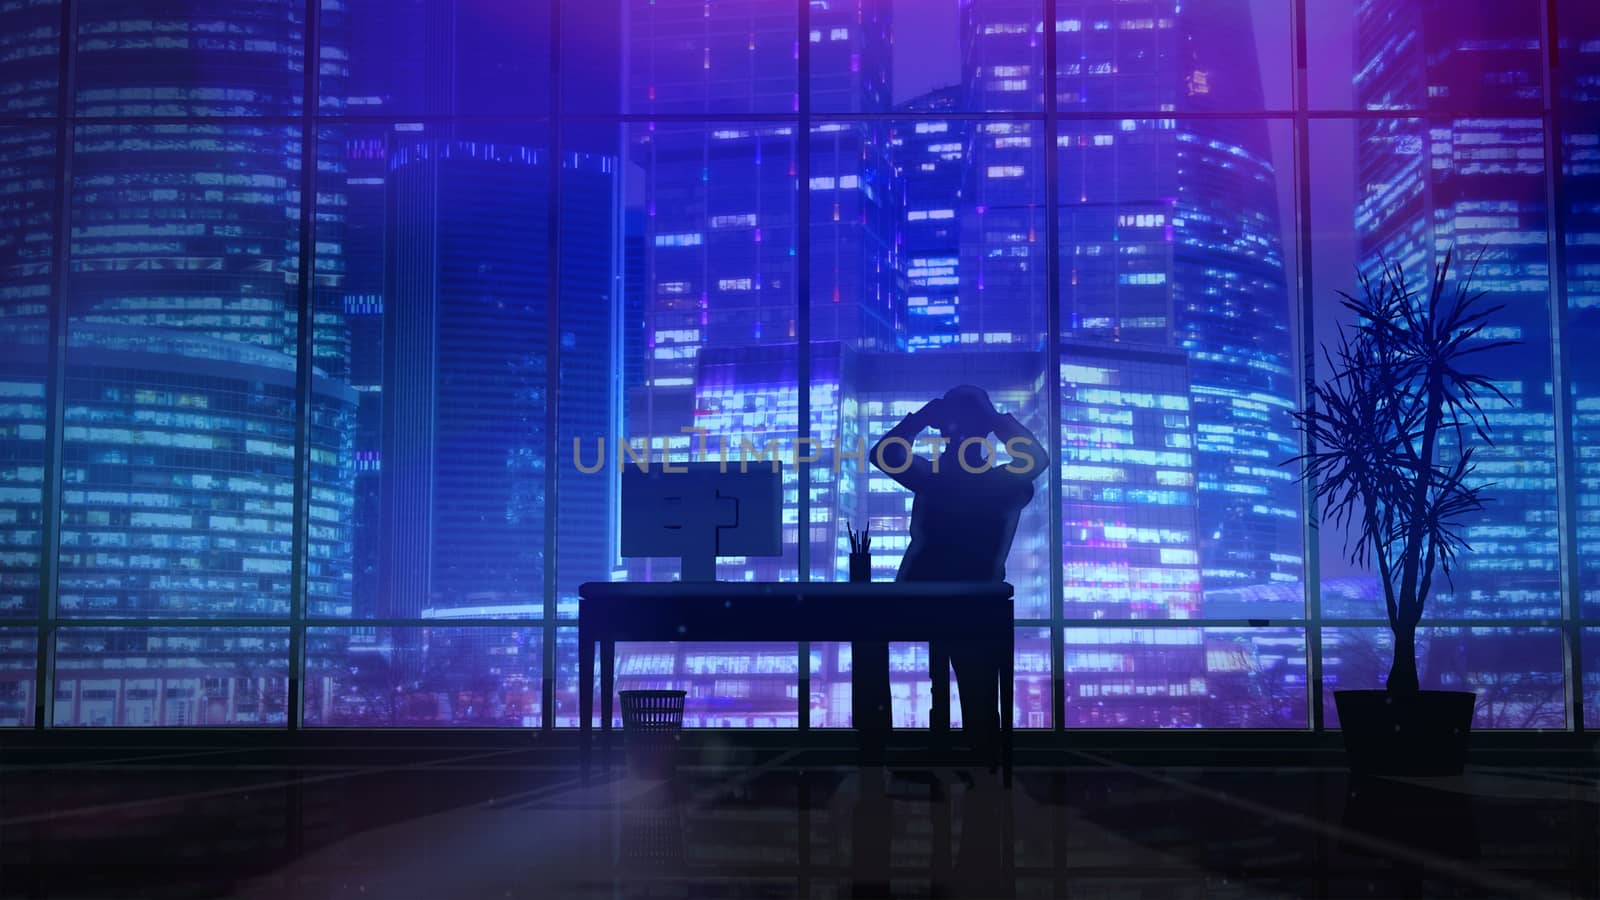 The man in the office holds his head against the background of the night skyscrapers.